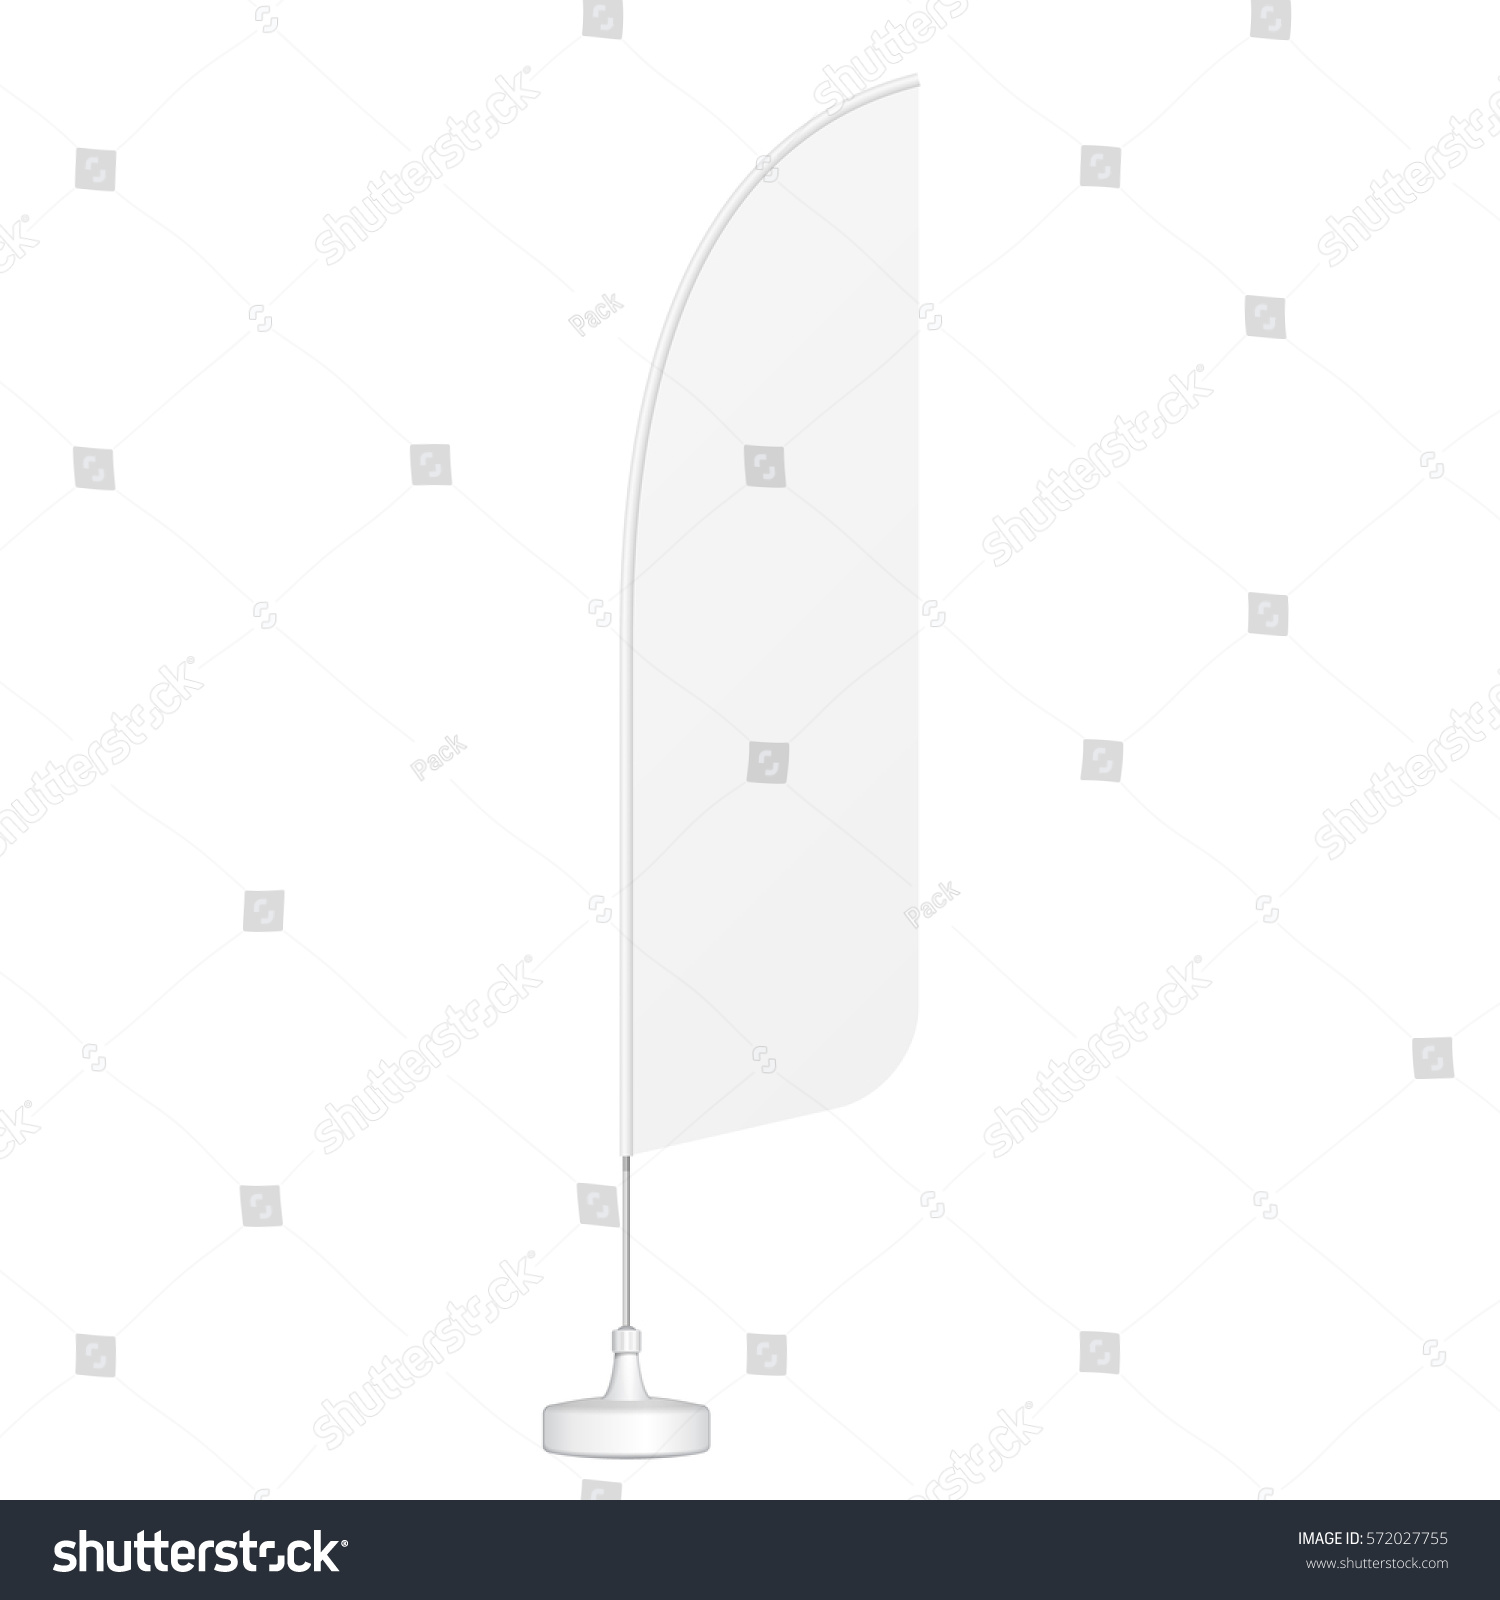 Outdoor Feather Blade Straight Flag, Shark Fin, Stander Advertising Banner Shield. Illustration Isolated On White Background. Mock Up Template Ready For Your Design. Product Advertising. Vector EPS10 #572027755